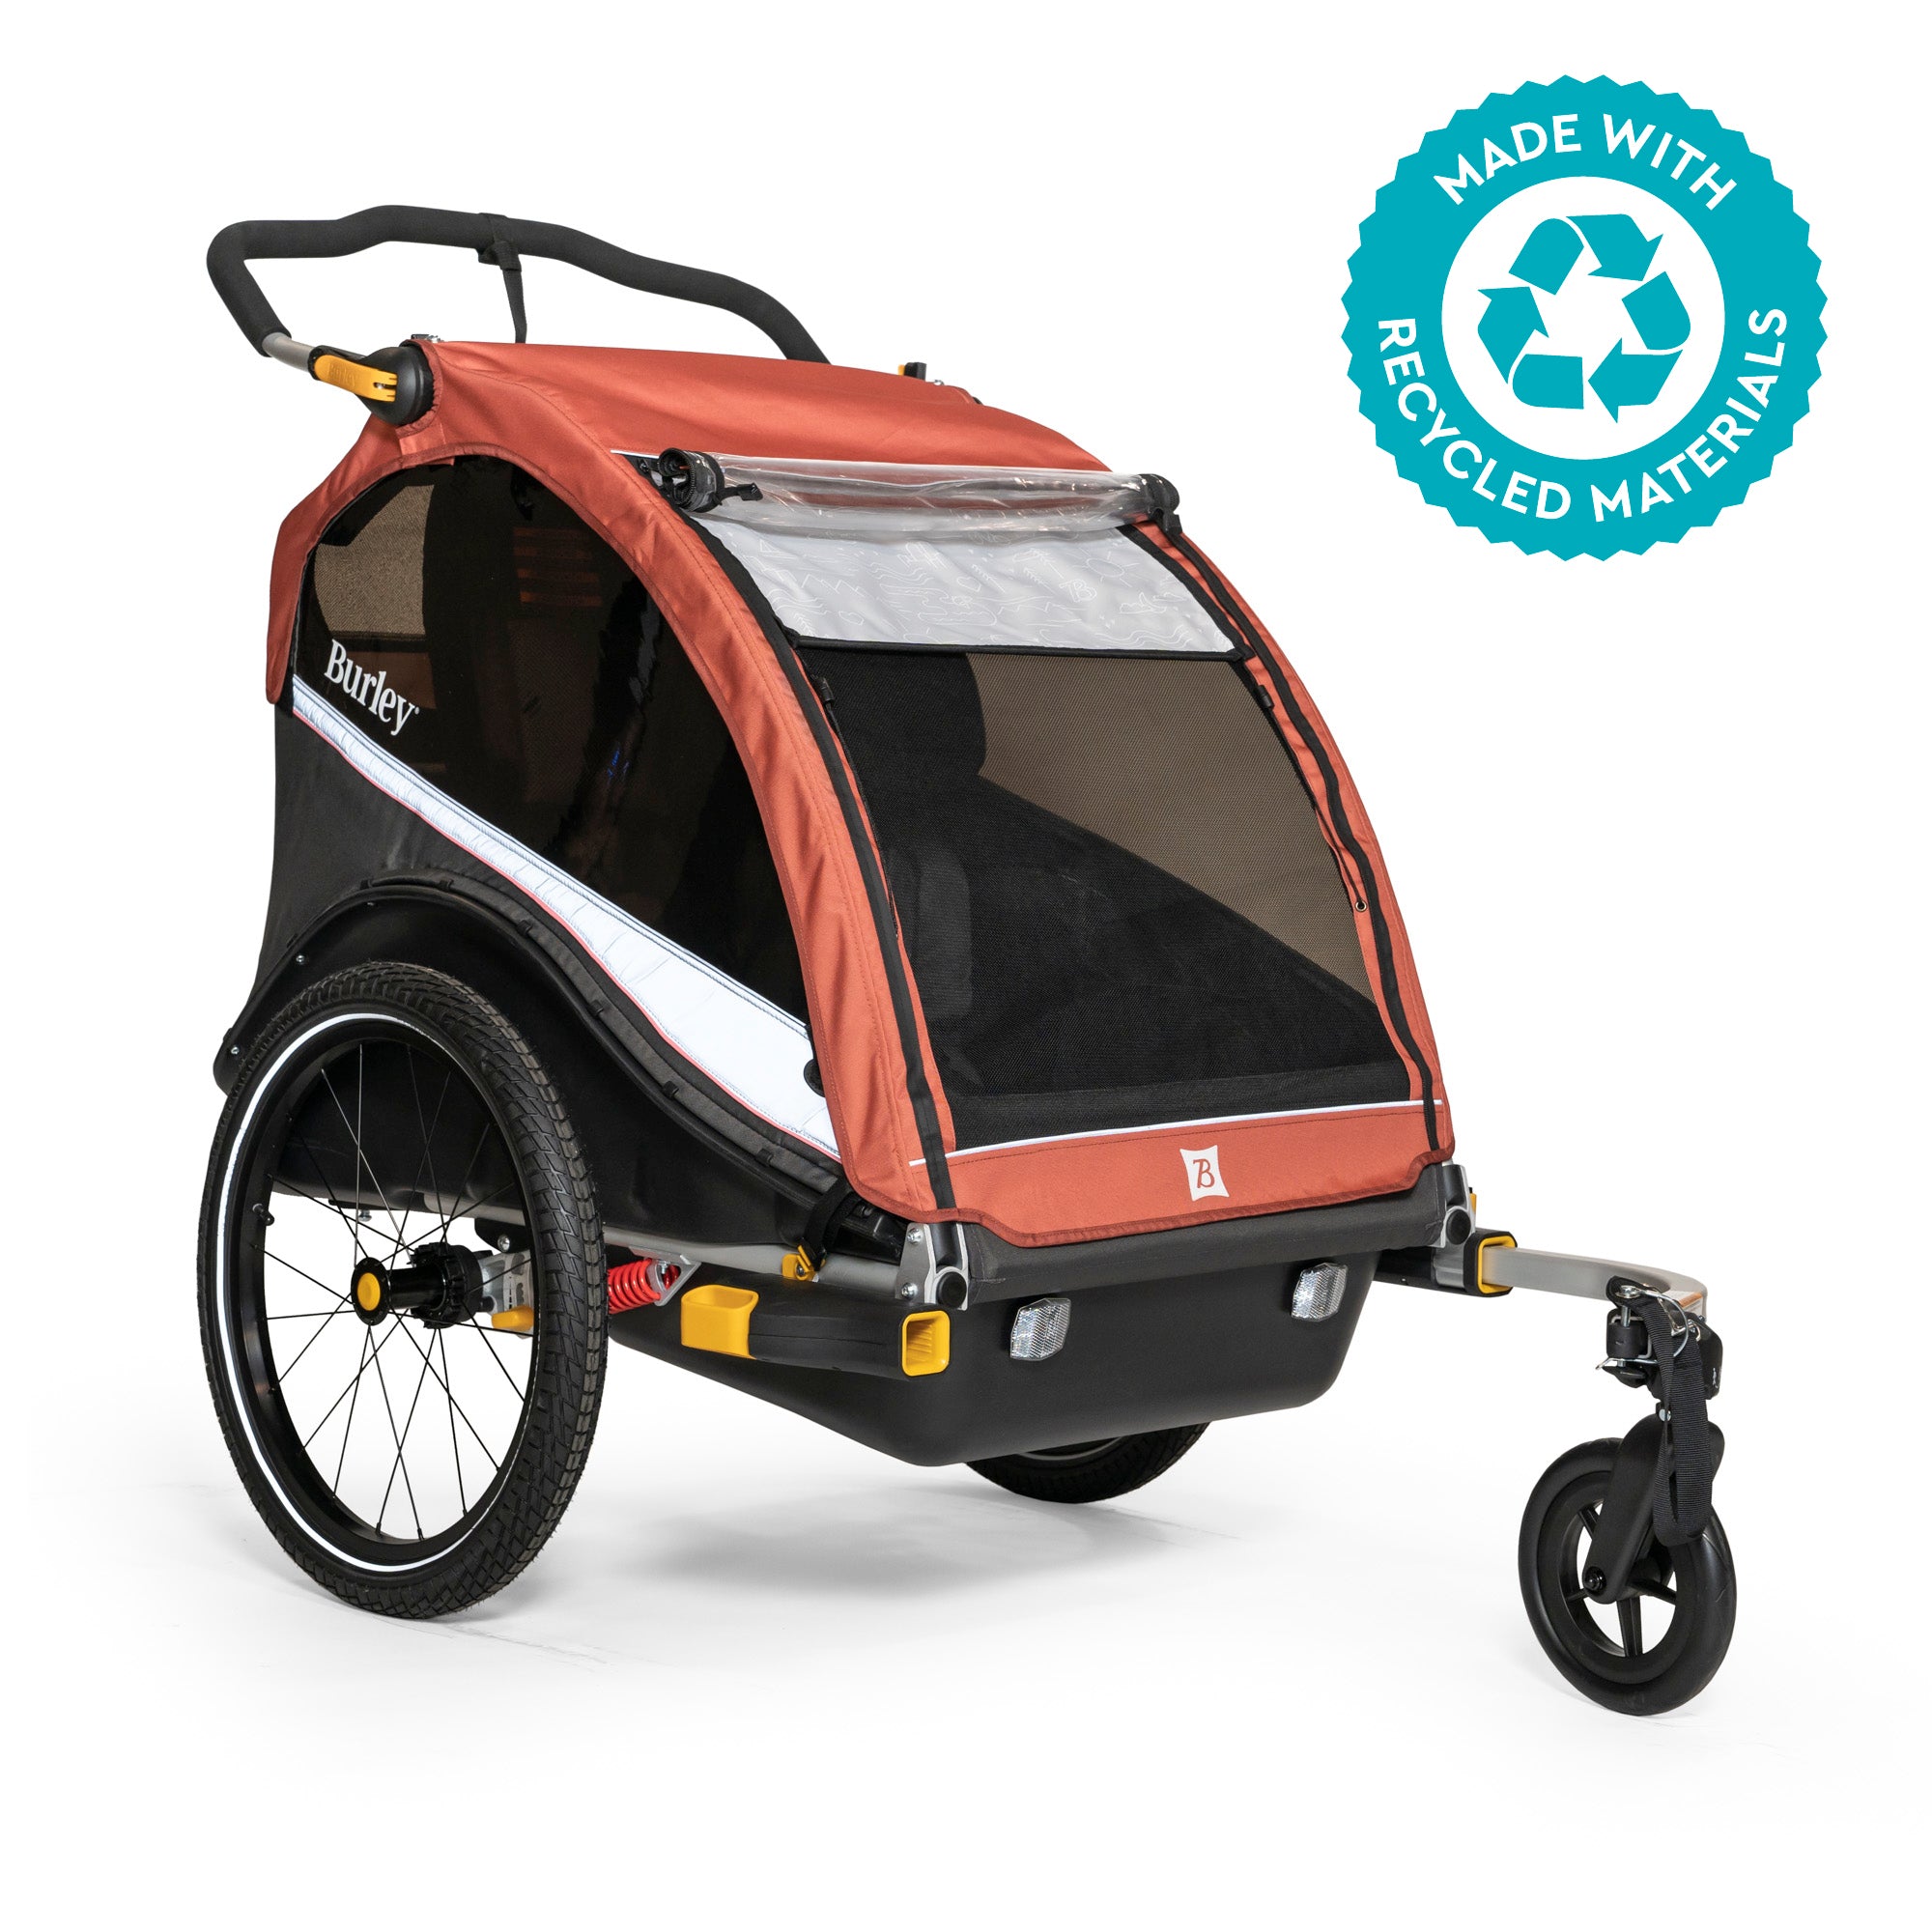 The Best Bike Trailers for Kids (and Pets) to Stay Cozy and Dry